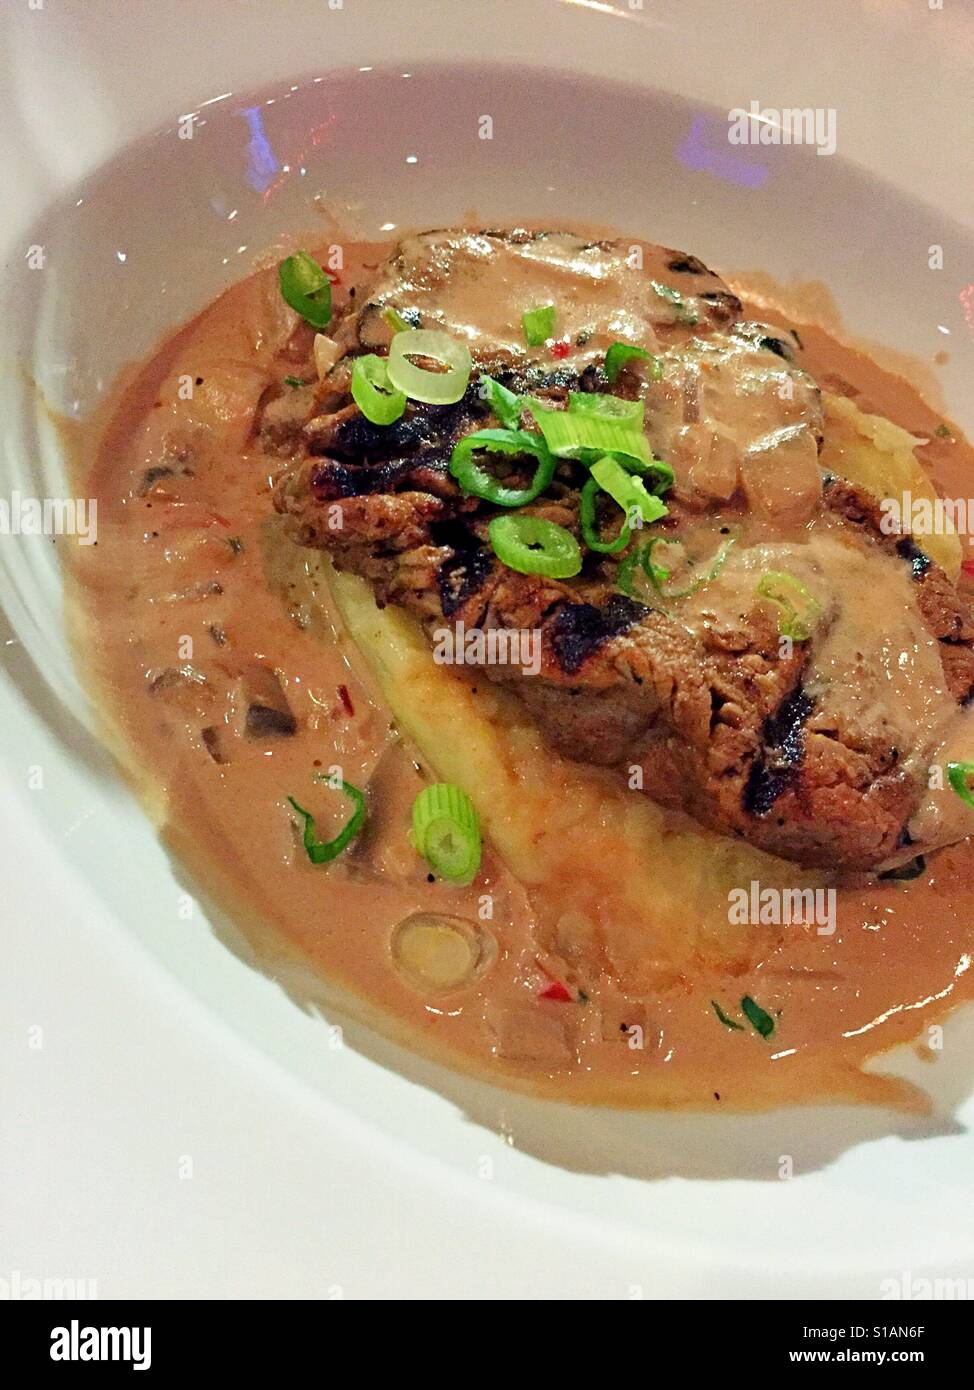 Fillet mignon steak topped with a red wine mushroom cream sauce and served with mashed potatoes at luxury upscale restaurant, NYC, USA Stock Photo